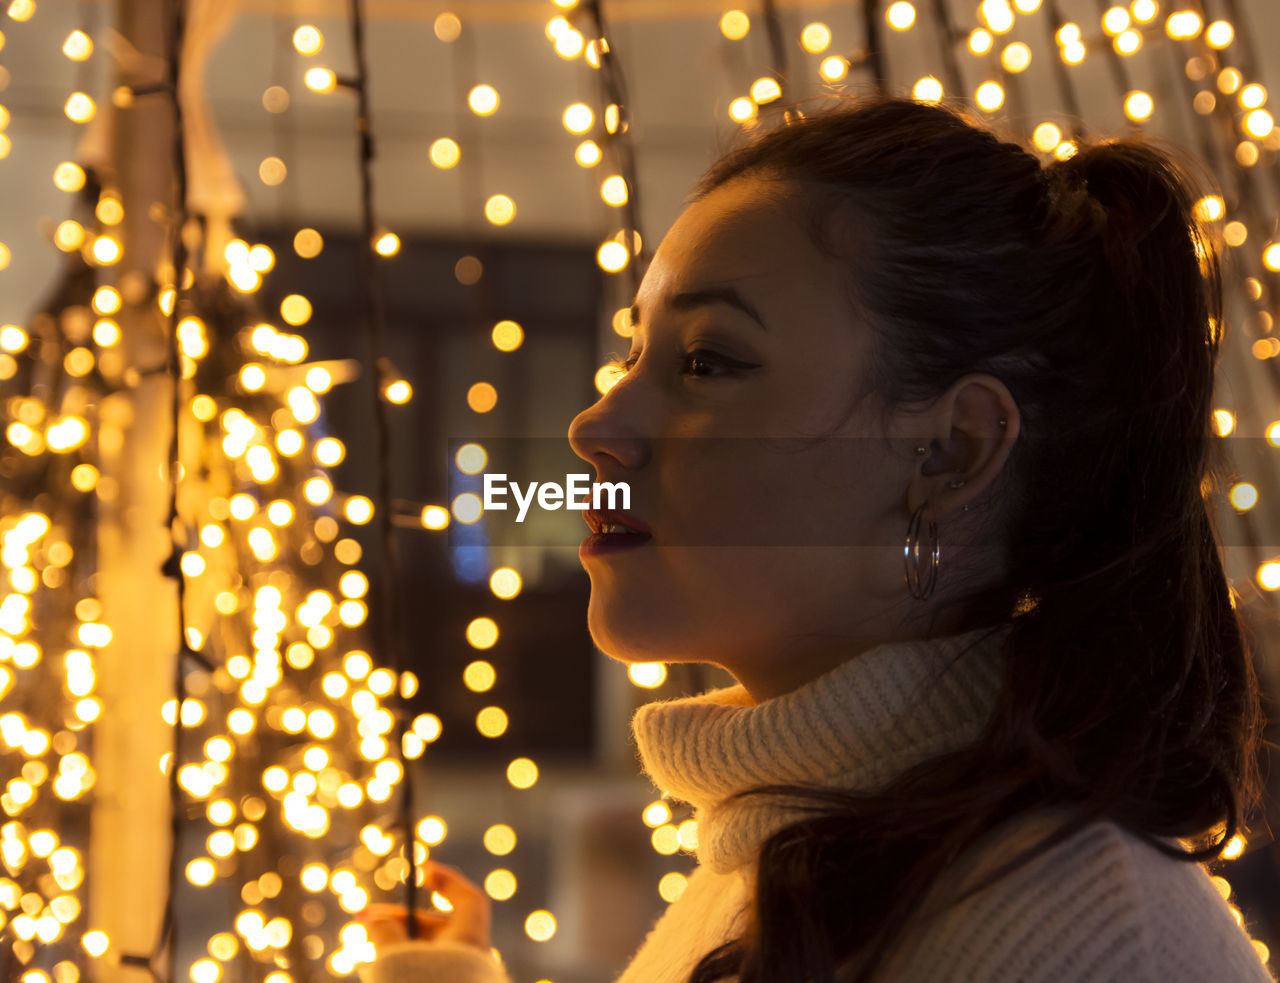 Side view of young woman against illuminated christmas lights